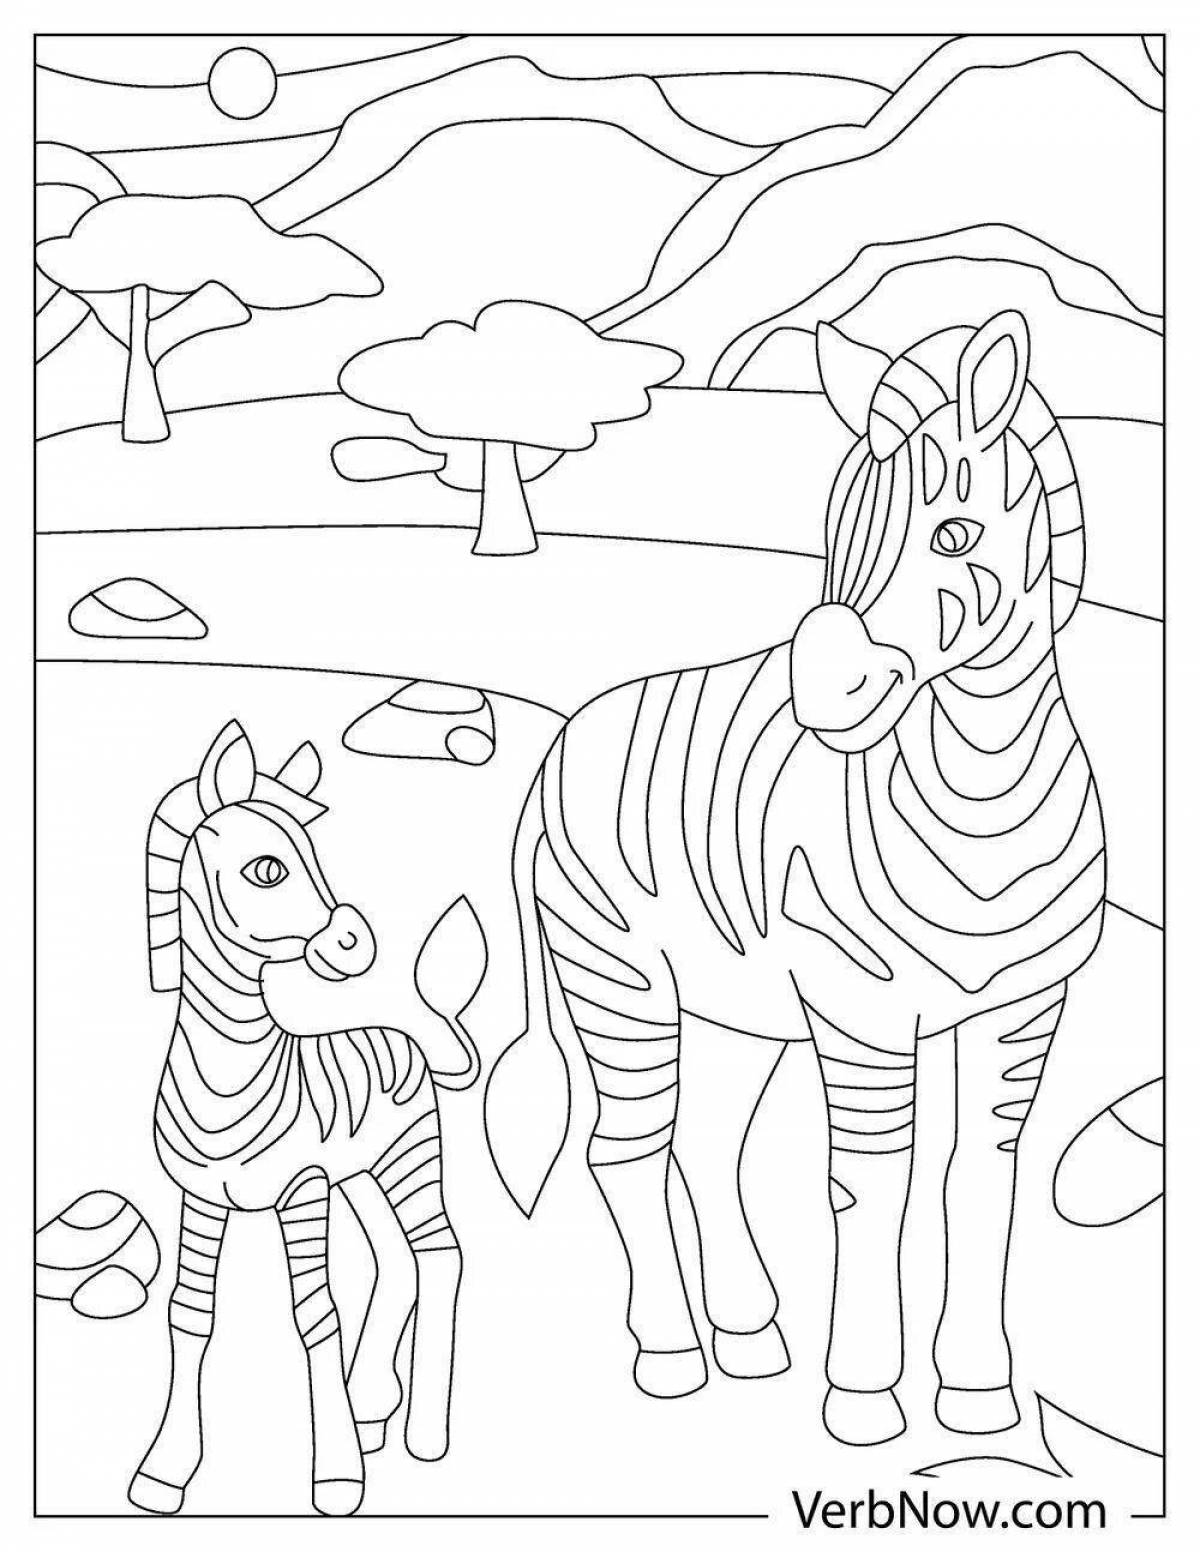 Great zebra coloring book for 3-4 year olds